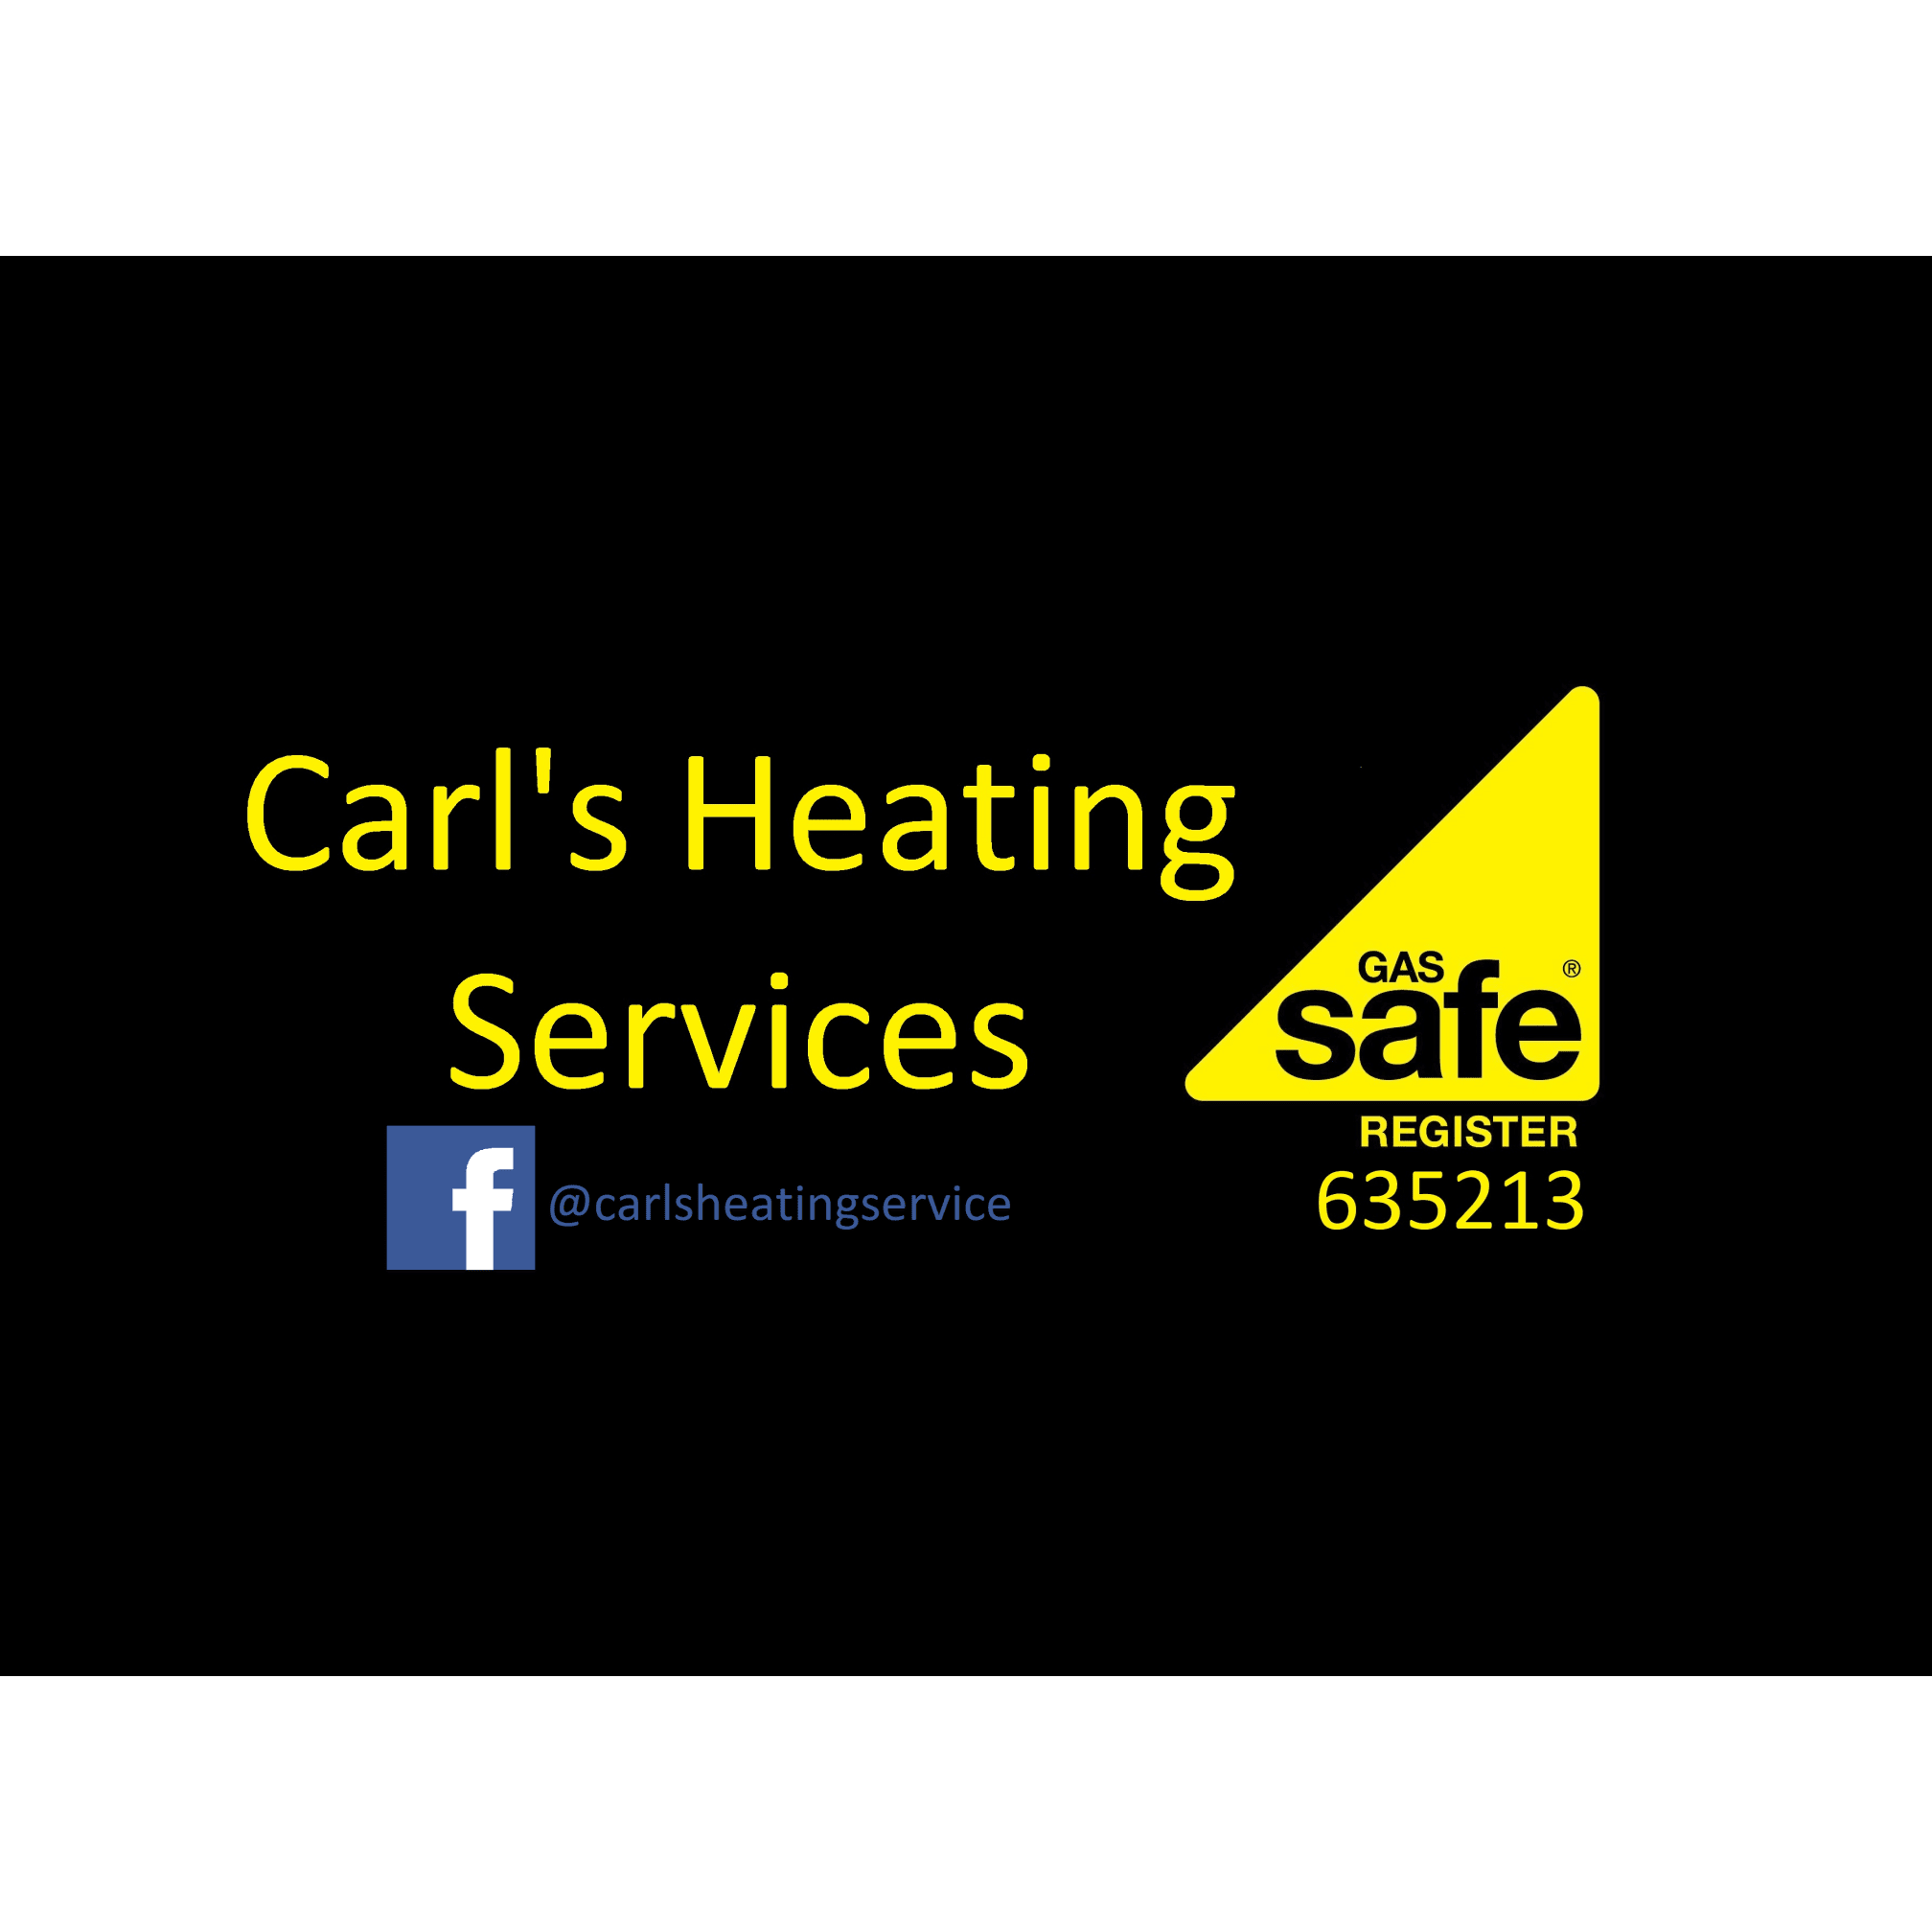 Carls Heating Services - Ebbw Vale, Gwent NP23 7SP - 07931 096157 | ShowMeLocal.com